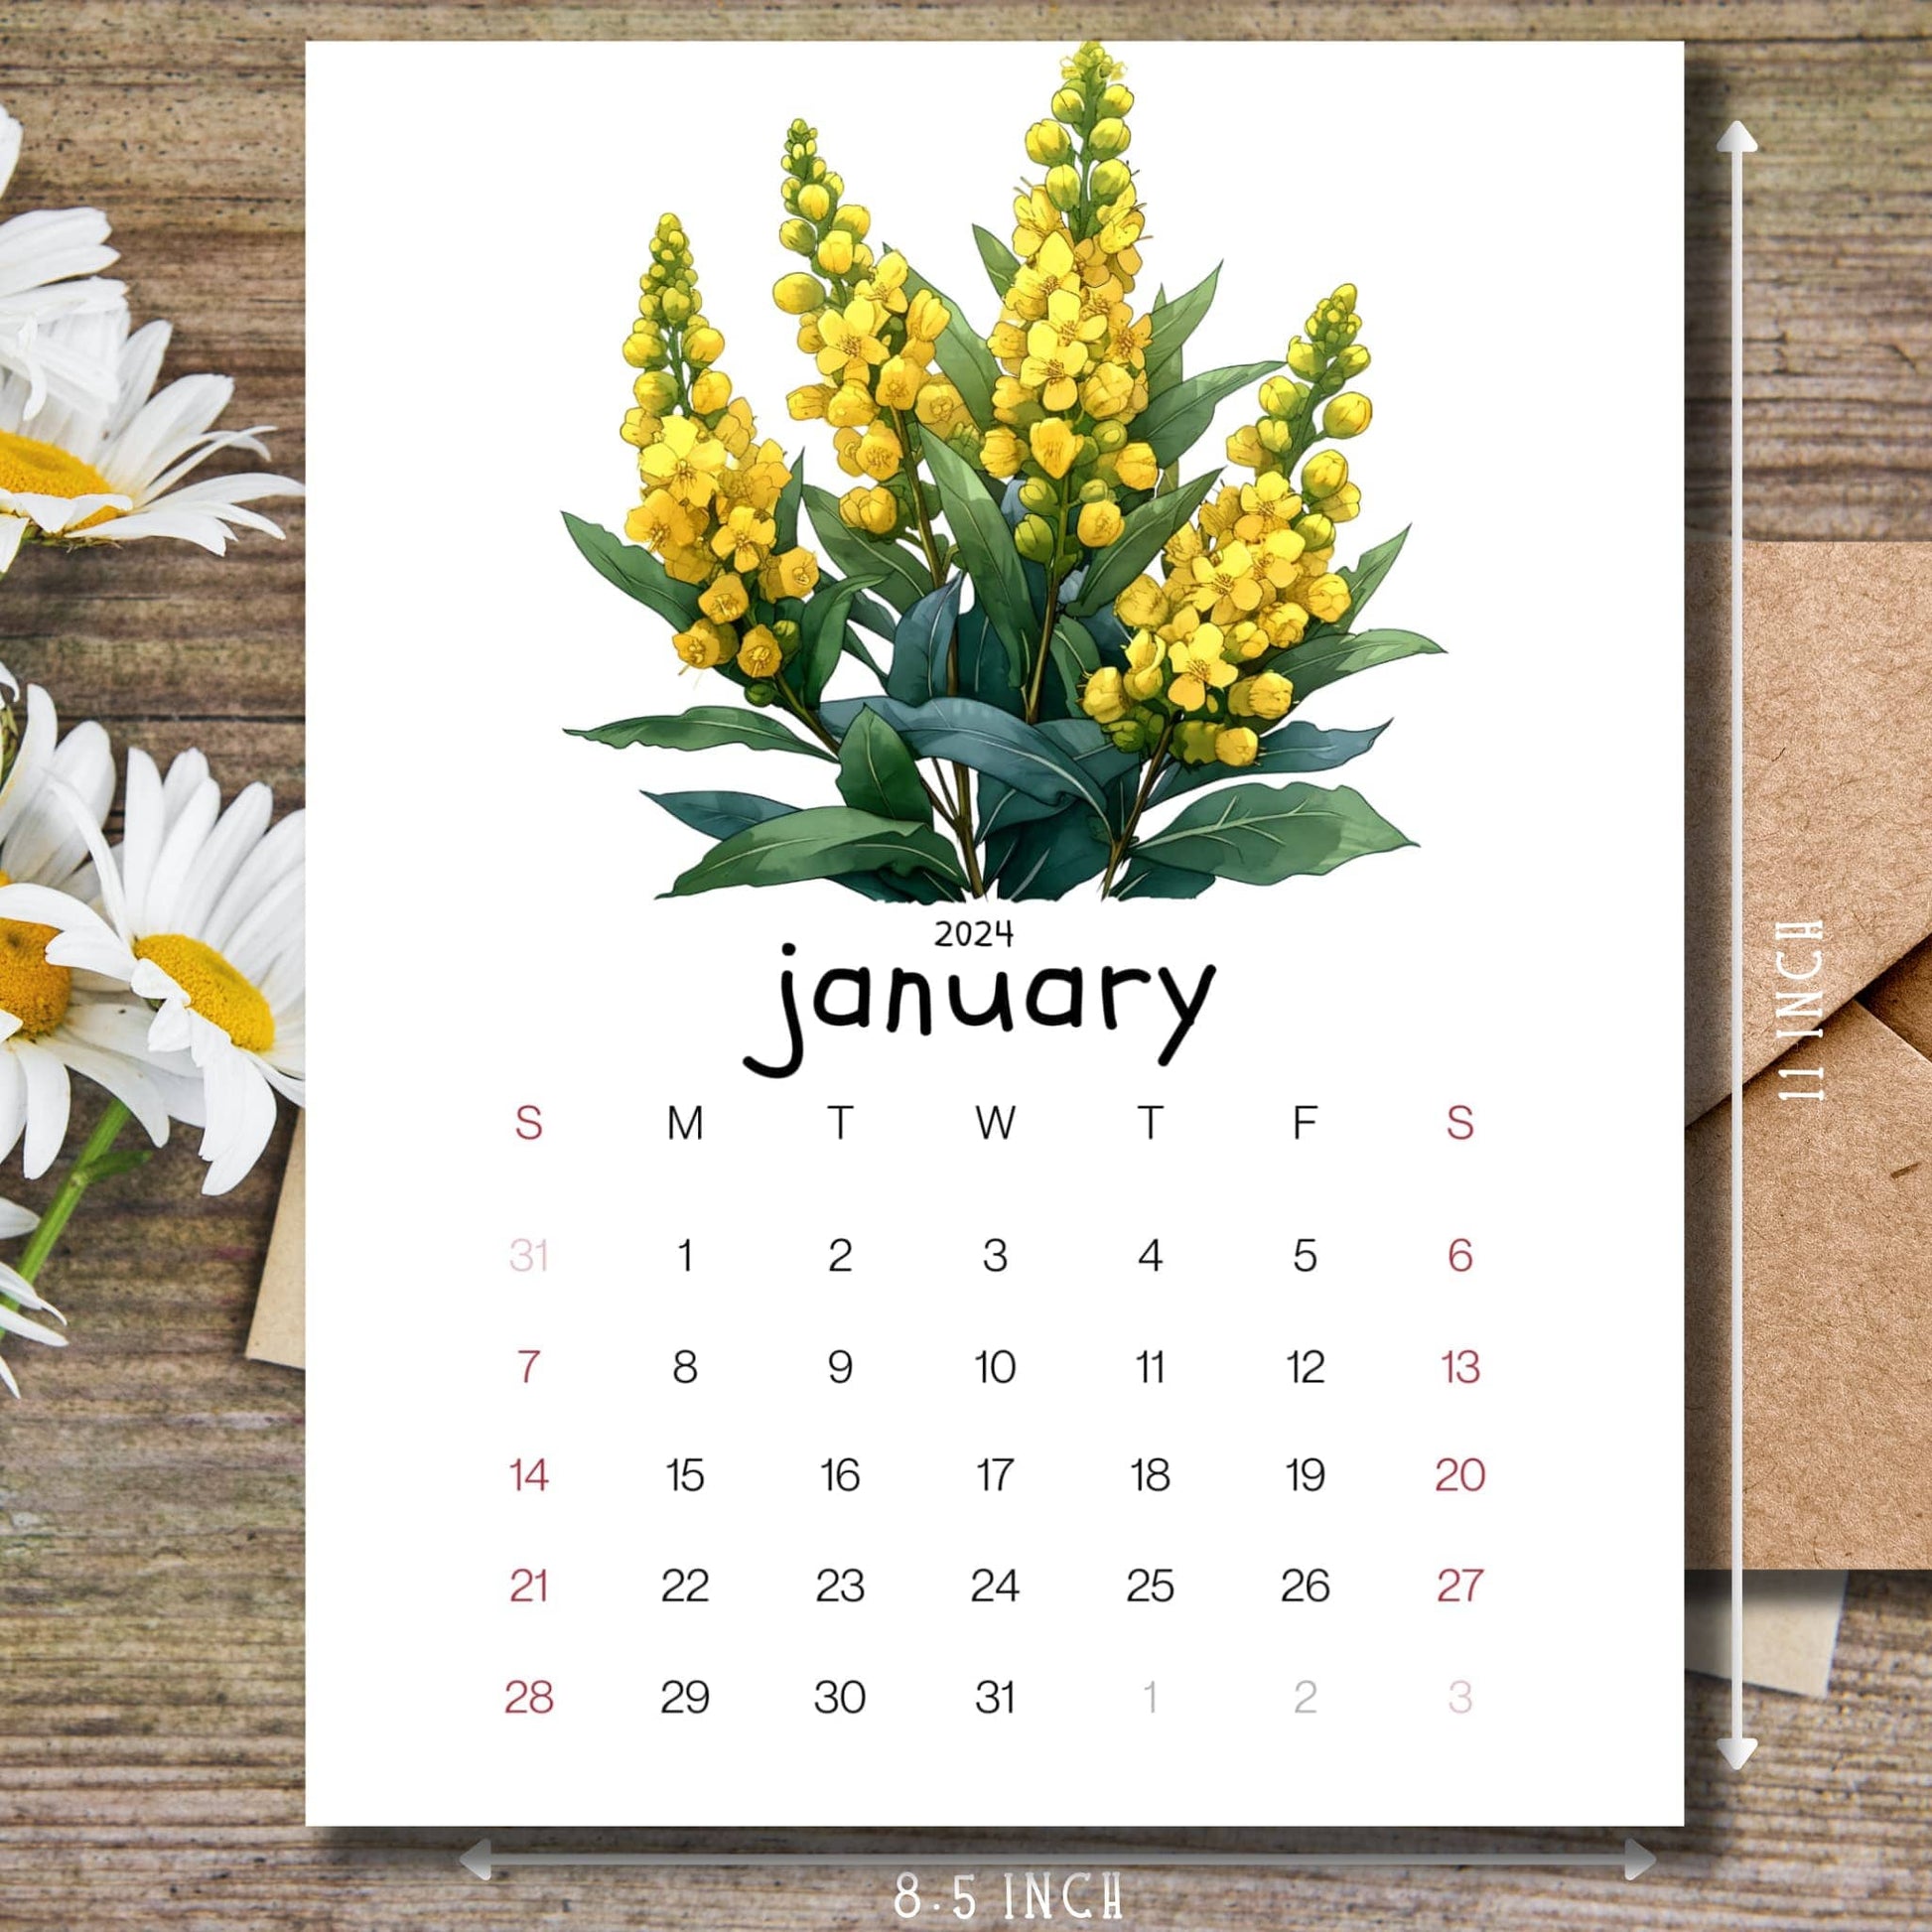 Mahonia Magic January 2024 calendar on a brown wooden desk with white flowers and a size guide on the side.